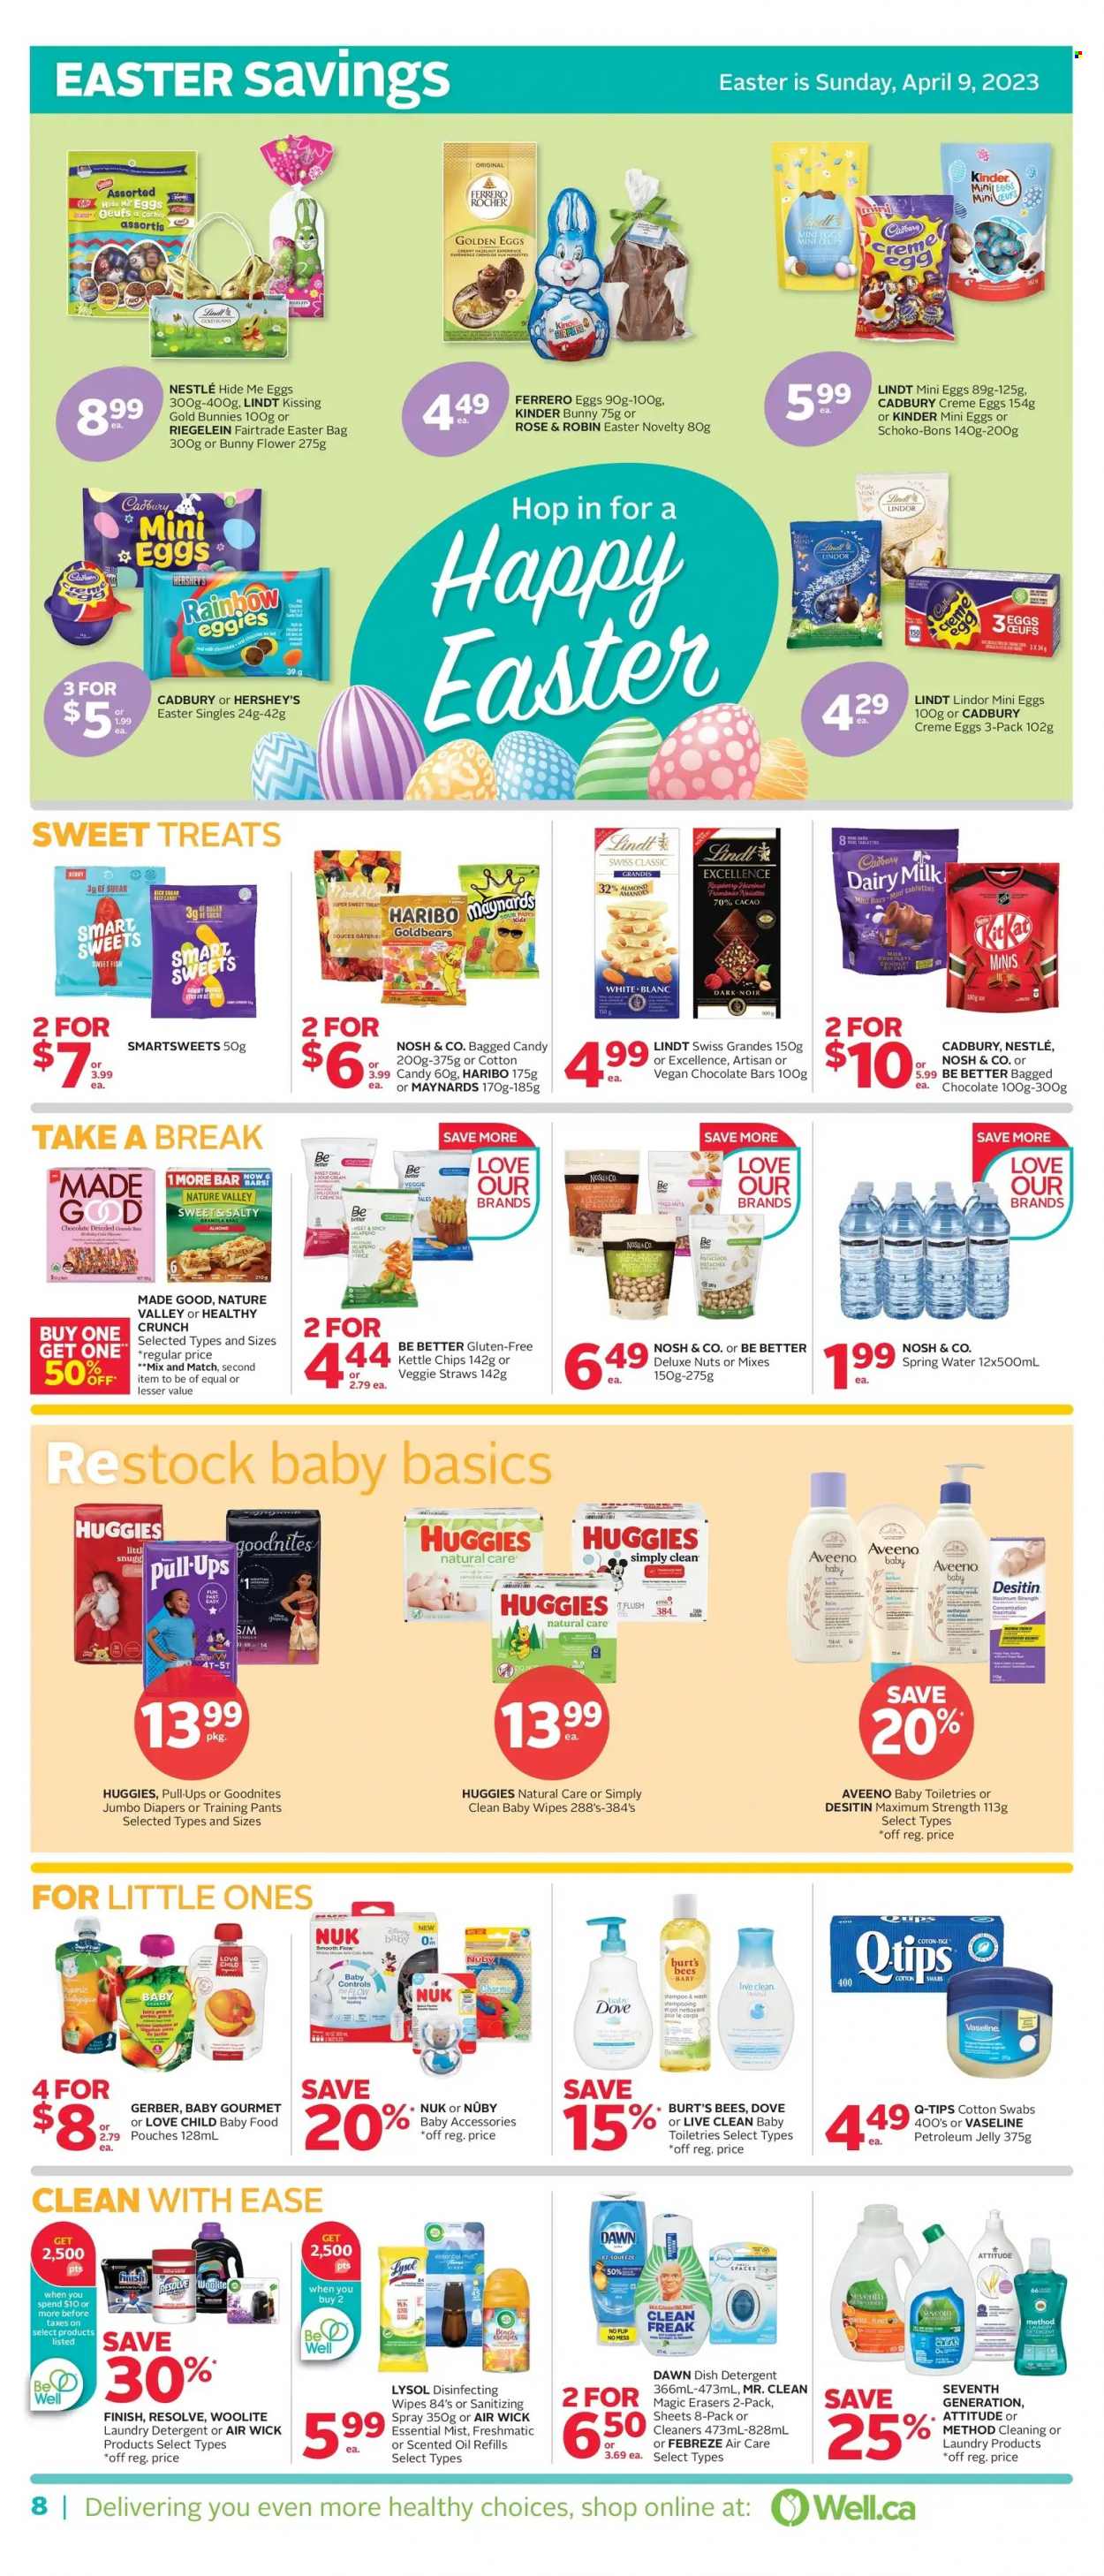 thumbnail - Rexall Flyer - March 17, 2023 - March 23, 2023 - Sales products - Dove, Haribo, Kinder Surprise, Hershey's, Cadbury, Dairy Milk, chocolate bar, Gerber, chips, veggie straws, Kettle chips, cane sugar, jalapeño, granola bar, Nature Valley, pistachios, spring water, water, rosé wine, wipes, pants, baby wipes, nappies, Nuk, baby pants, Aveeno, Mickey Mouse, petroleum jelly, Febreze, Lysol, Woolite, laundry detergent, dishwasher cleaner, Vaseline, Air Wick, scented oil, Desitin, detergent, Nestlé, shampoo, Huggies, Lindt, Lindor, Ferrero Rocher. Page 8.